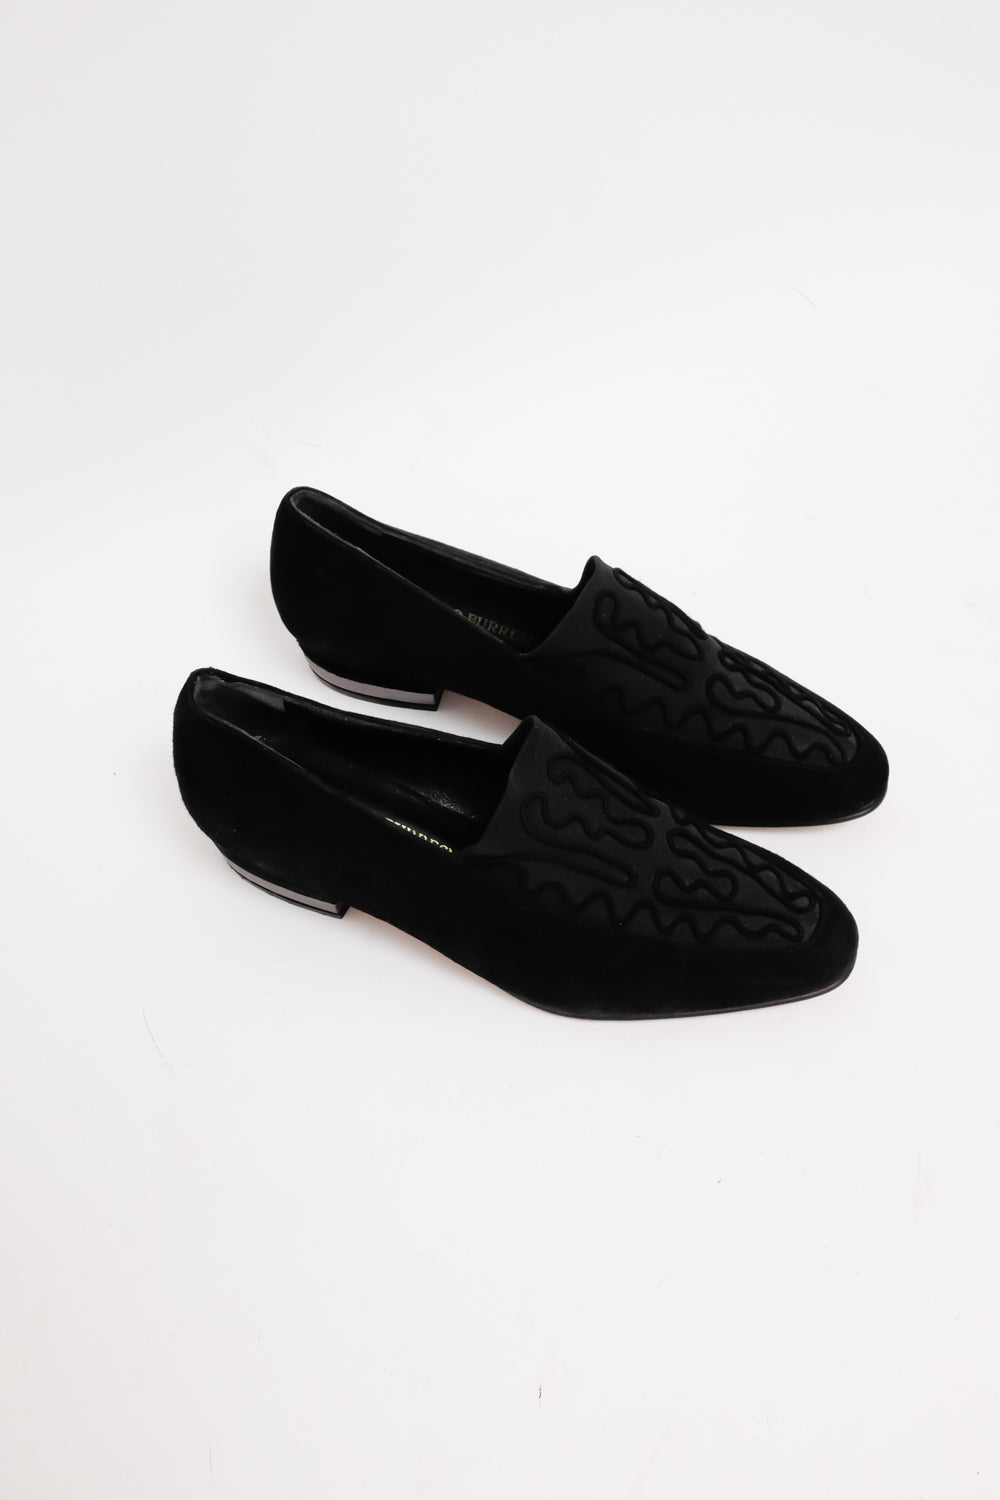 MARCO BURRESI ITALY BLACK LEATHER LOAFER 36,5